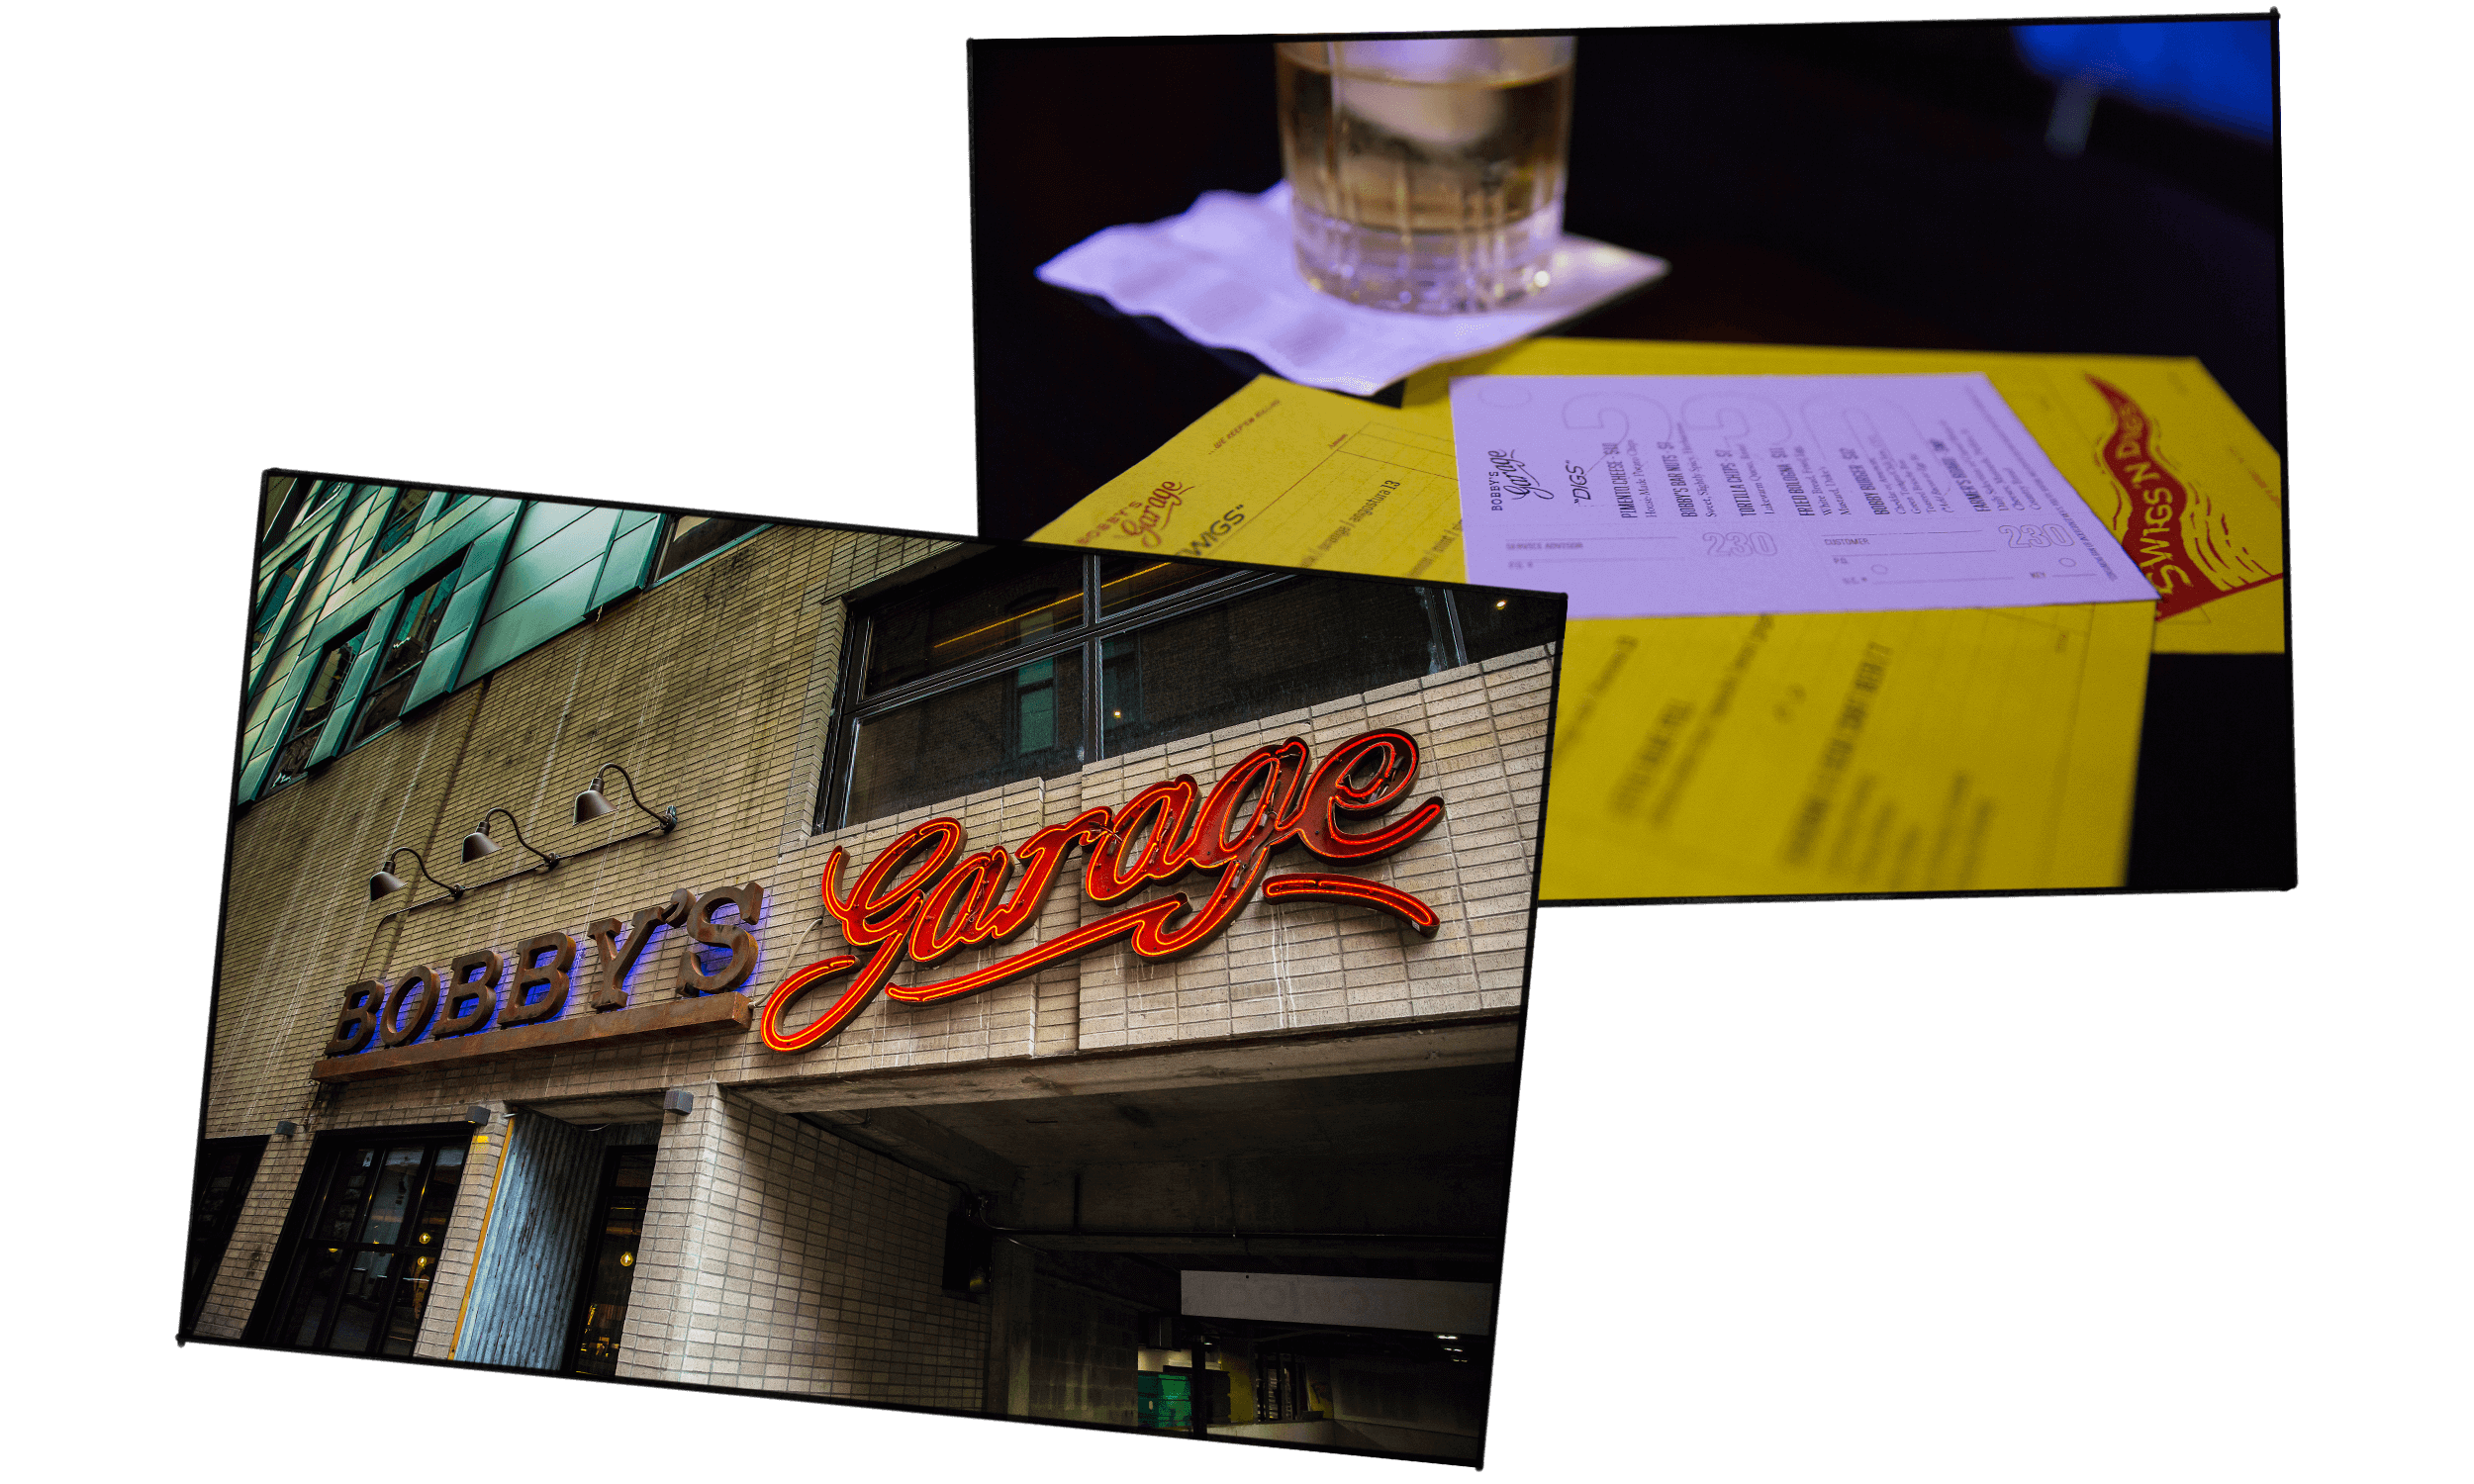 Pictures of neon sign and menus as Bobby's Garage dive bar